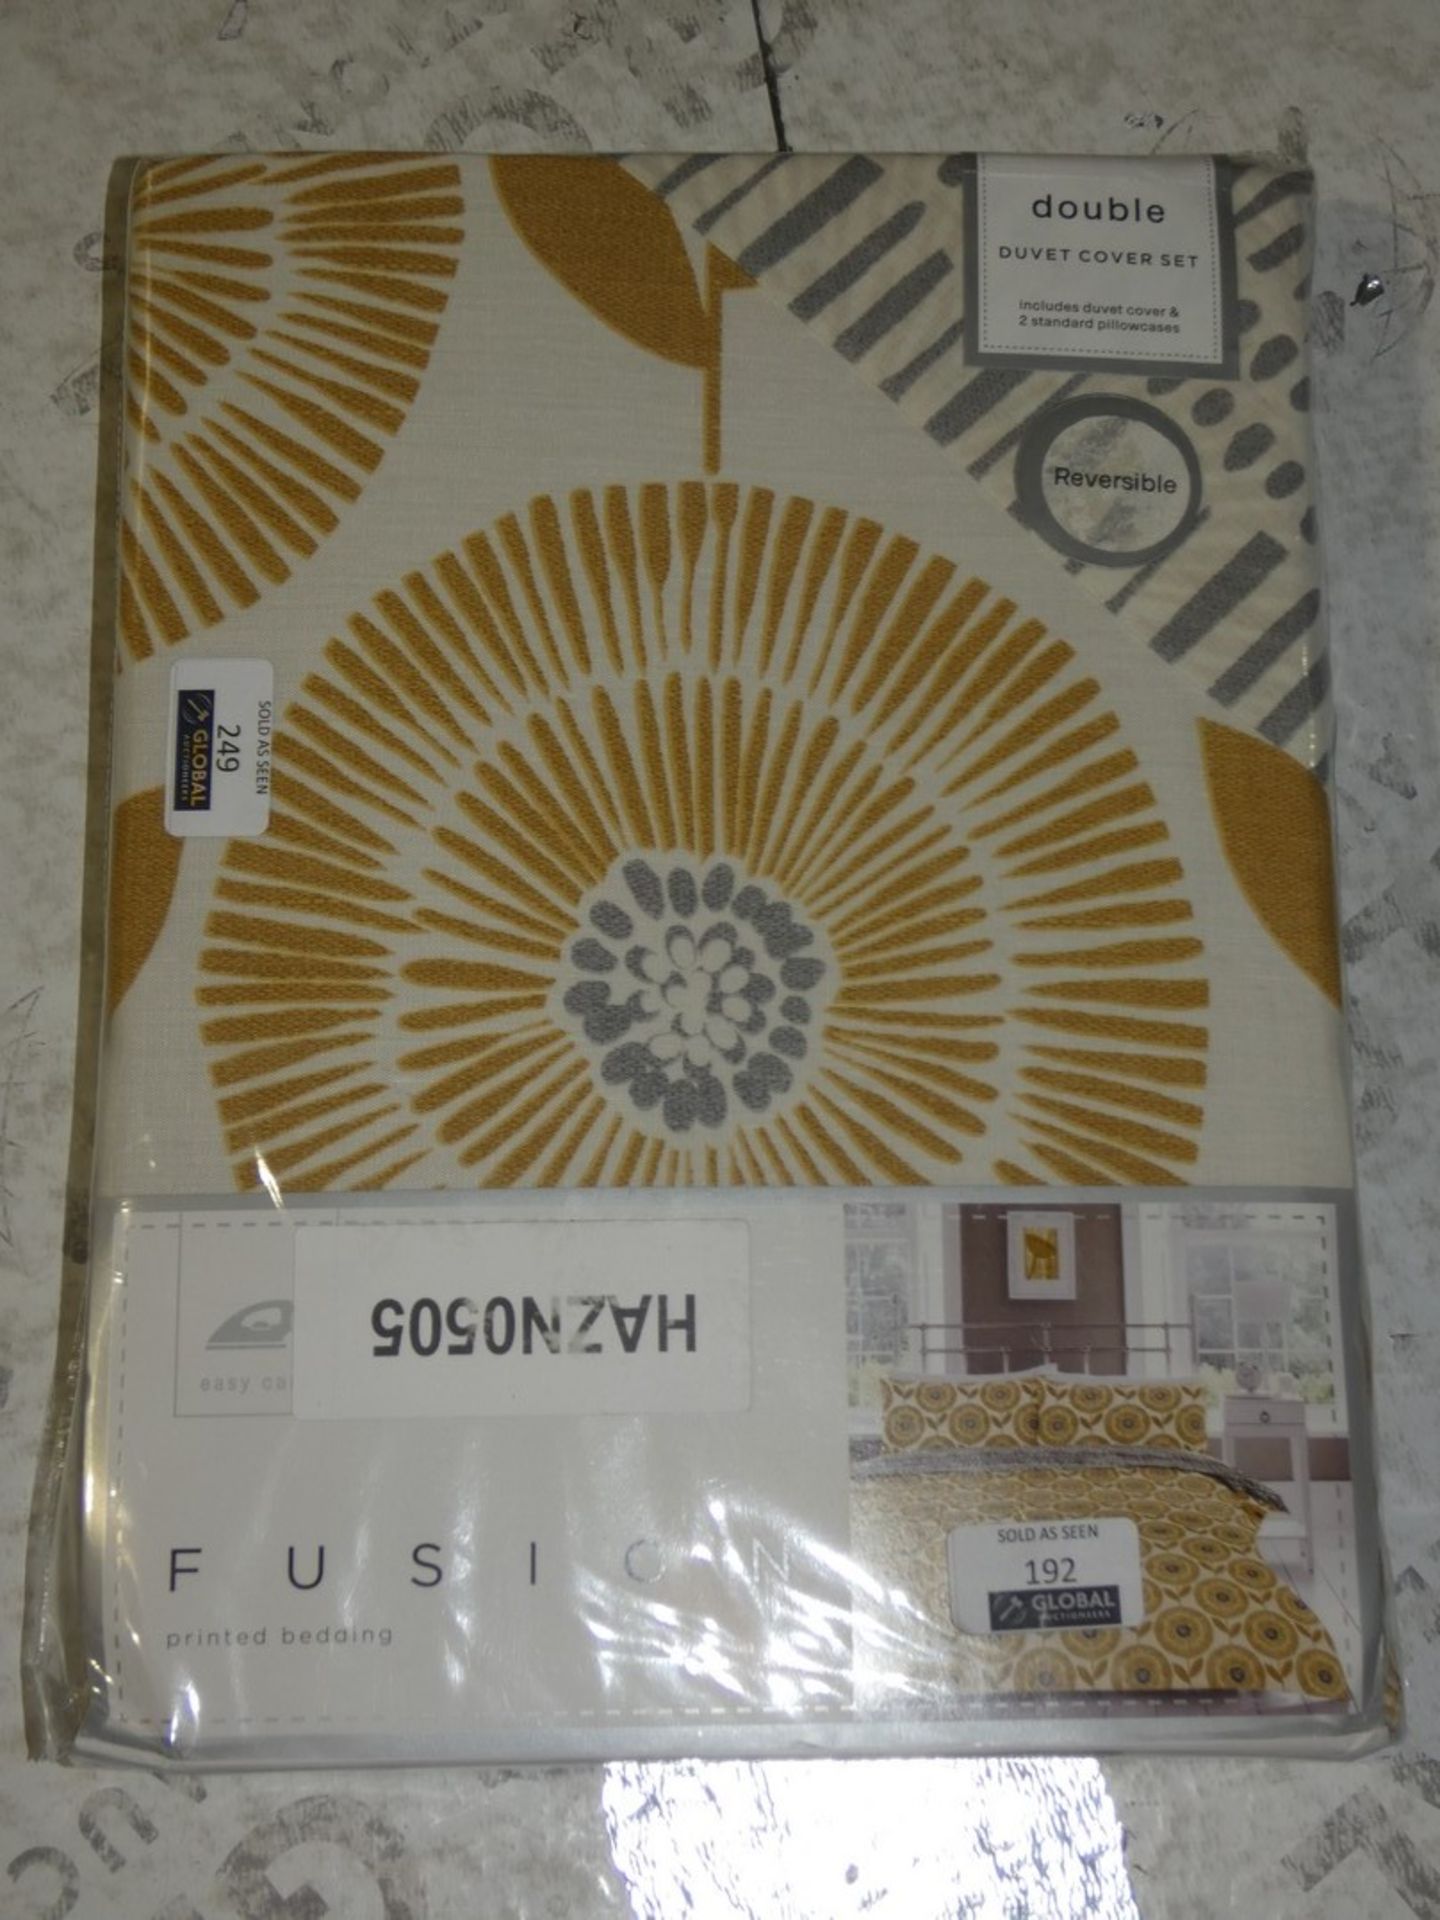 Brand New Sealed Fusion Double and Single Duvet Cover Sets